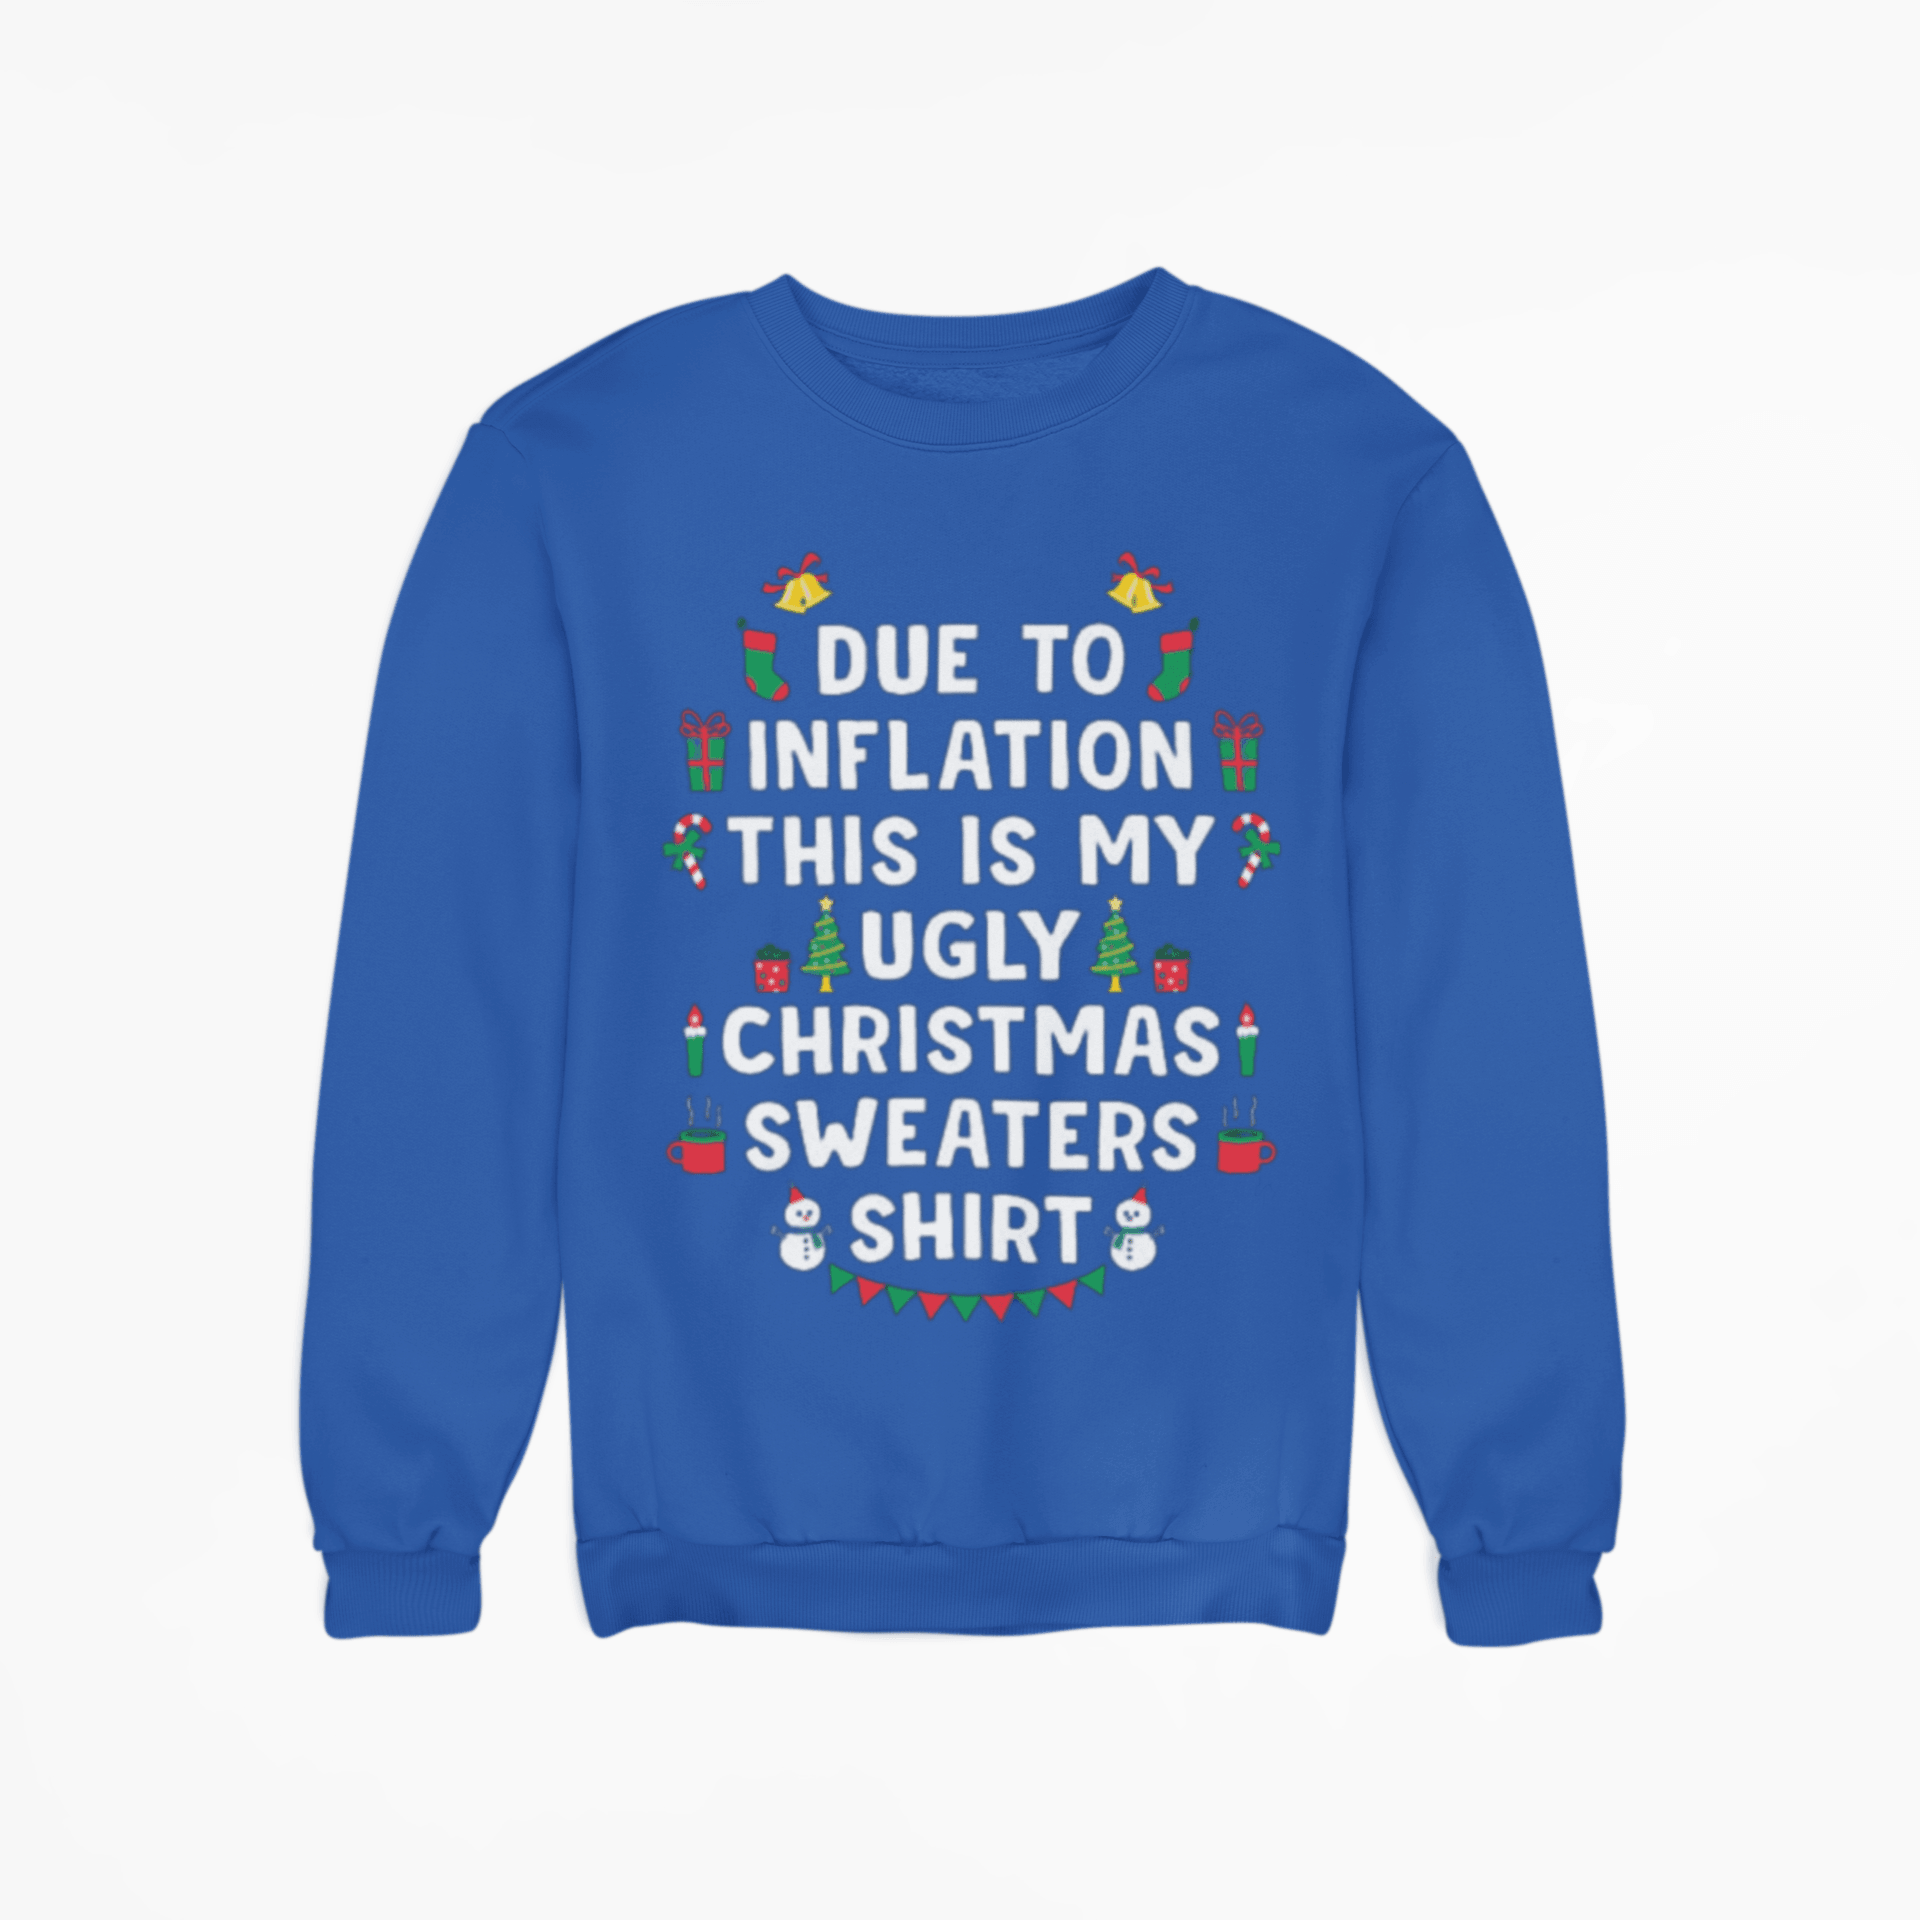 Due To Inflation This is My Ugly Christmas Sweater Cotton Blend Unisex Pullover - TopKoalaTee